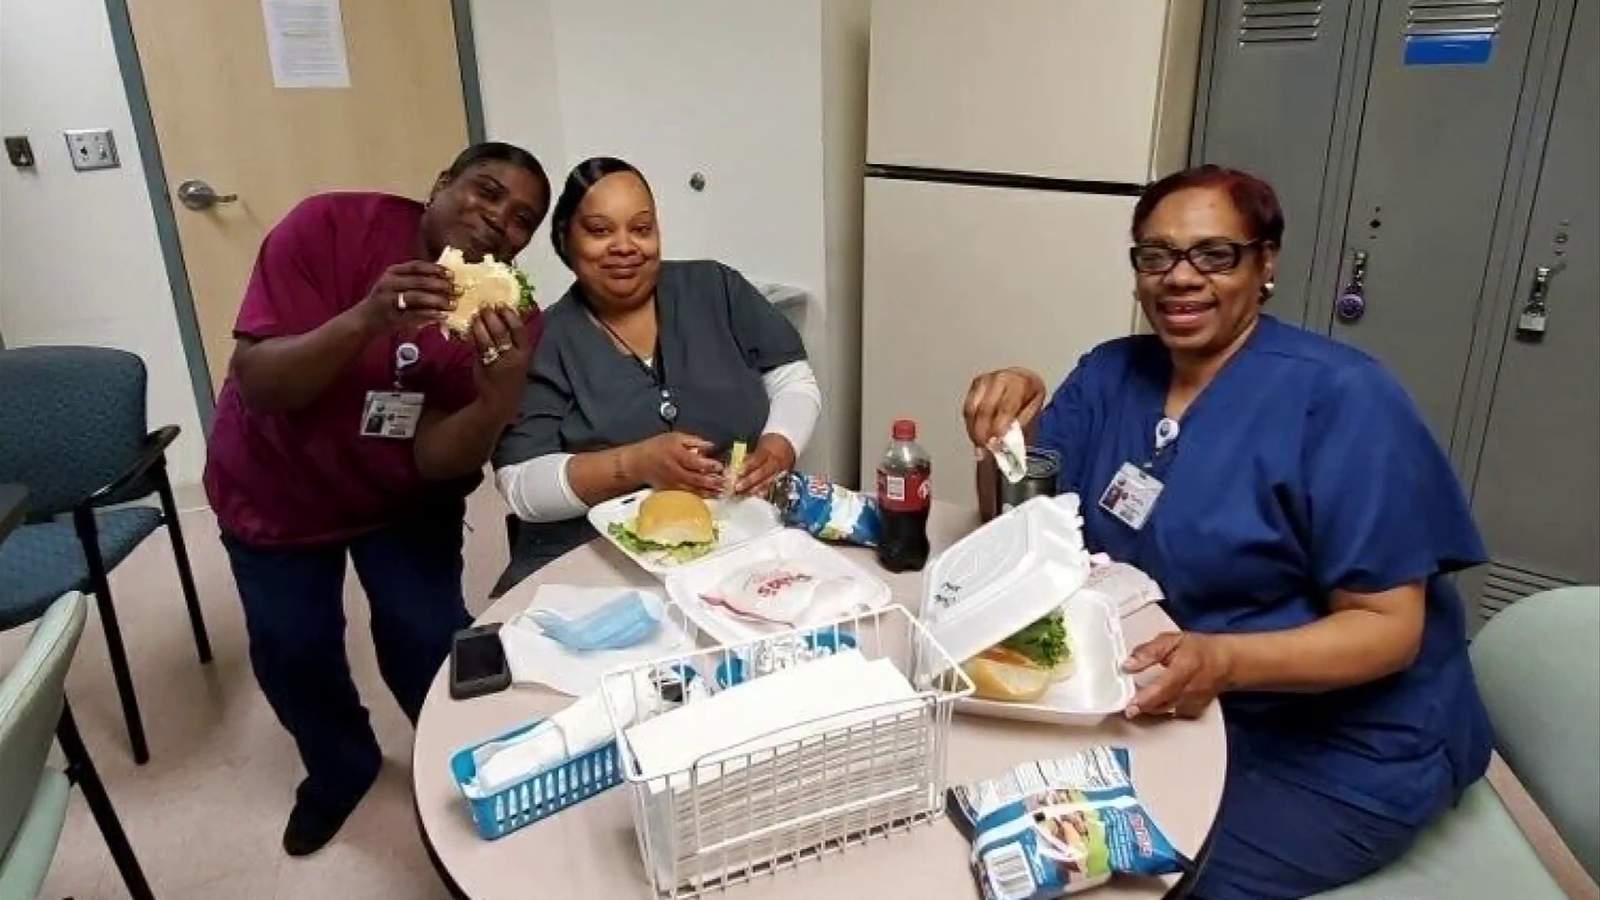 Centra Health employees receive lunch from Macados thanks to Food for Frontline